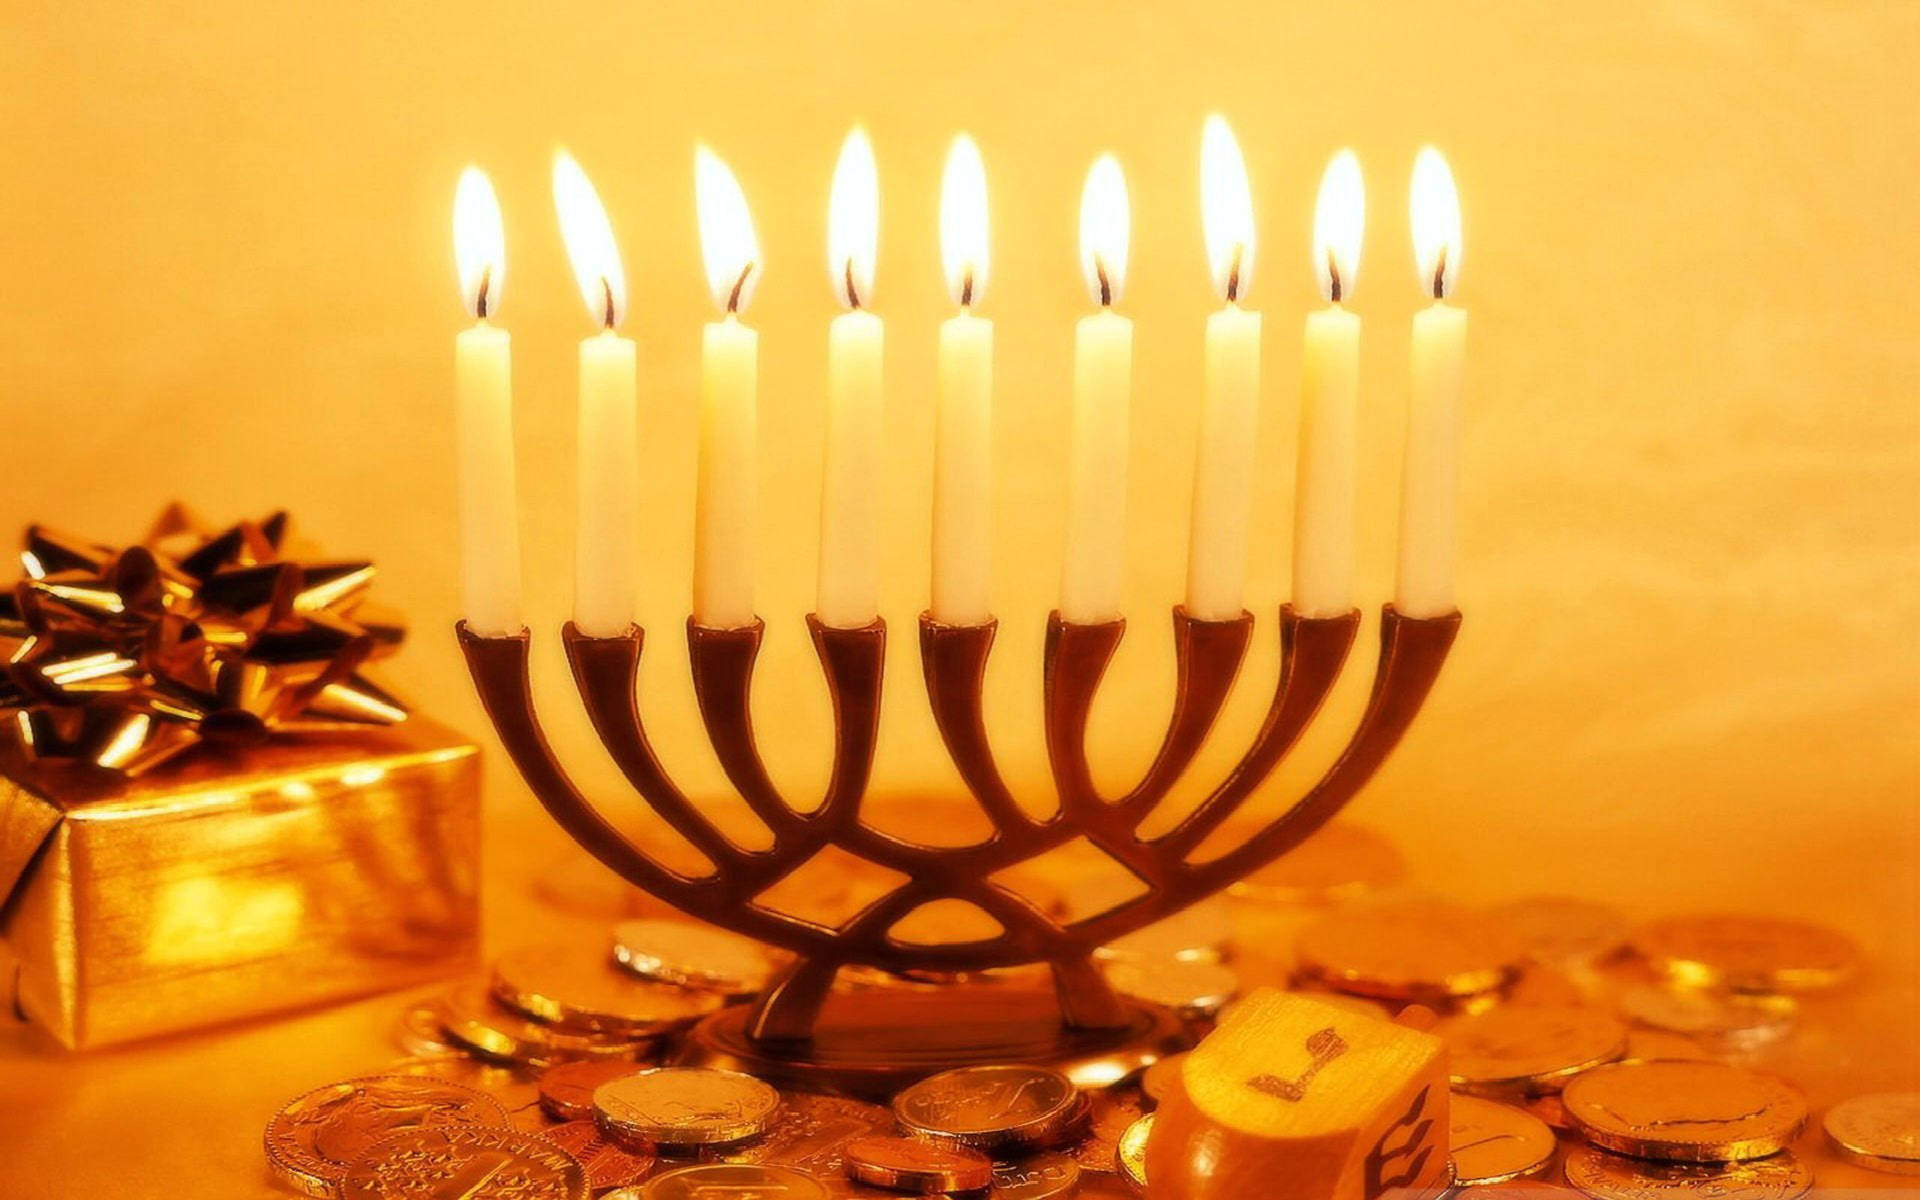 Caption: Illuminating Hanukkah Celebration with Traditional Coins and Candles Wallpaper